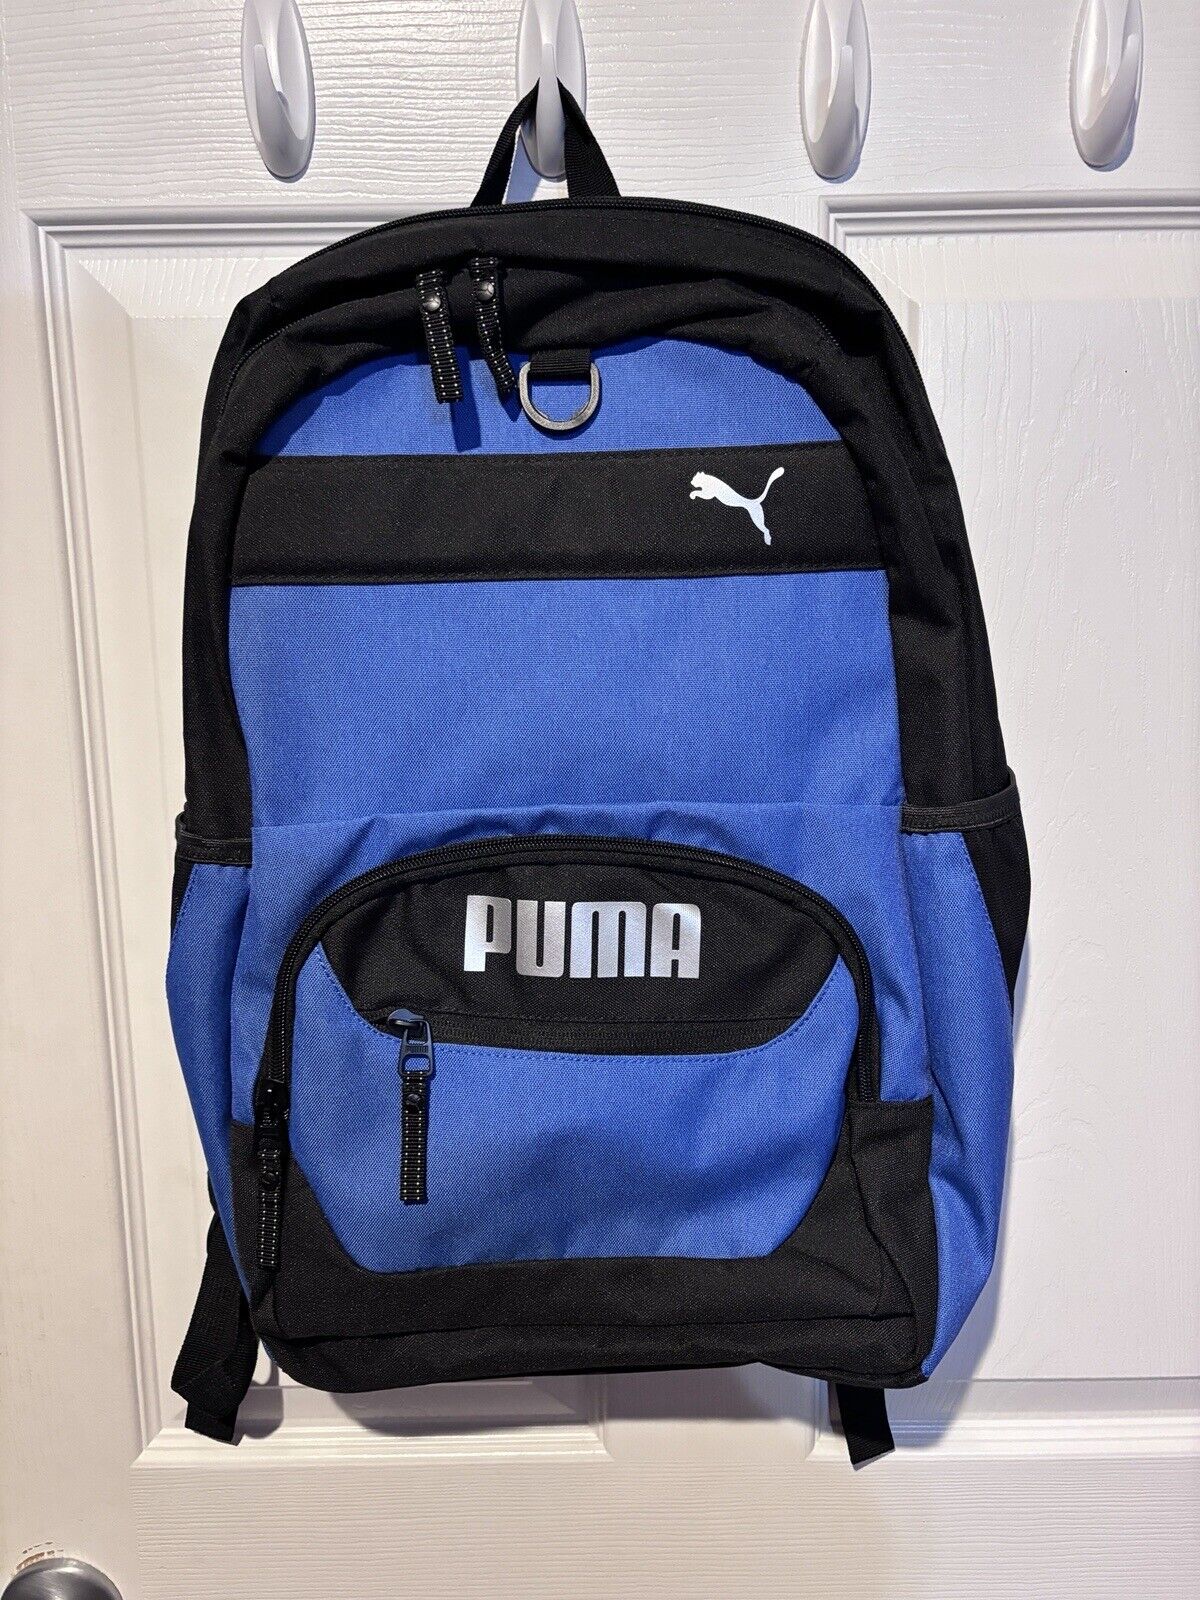 Puma Everyday Backpack--Black & Blue Unisex--New With Tags $55 MSRP